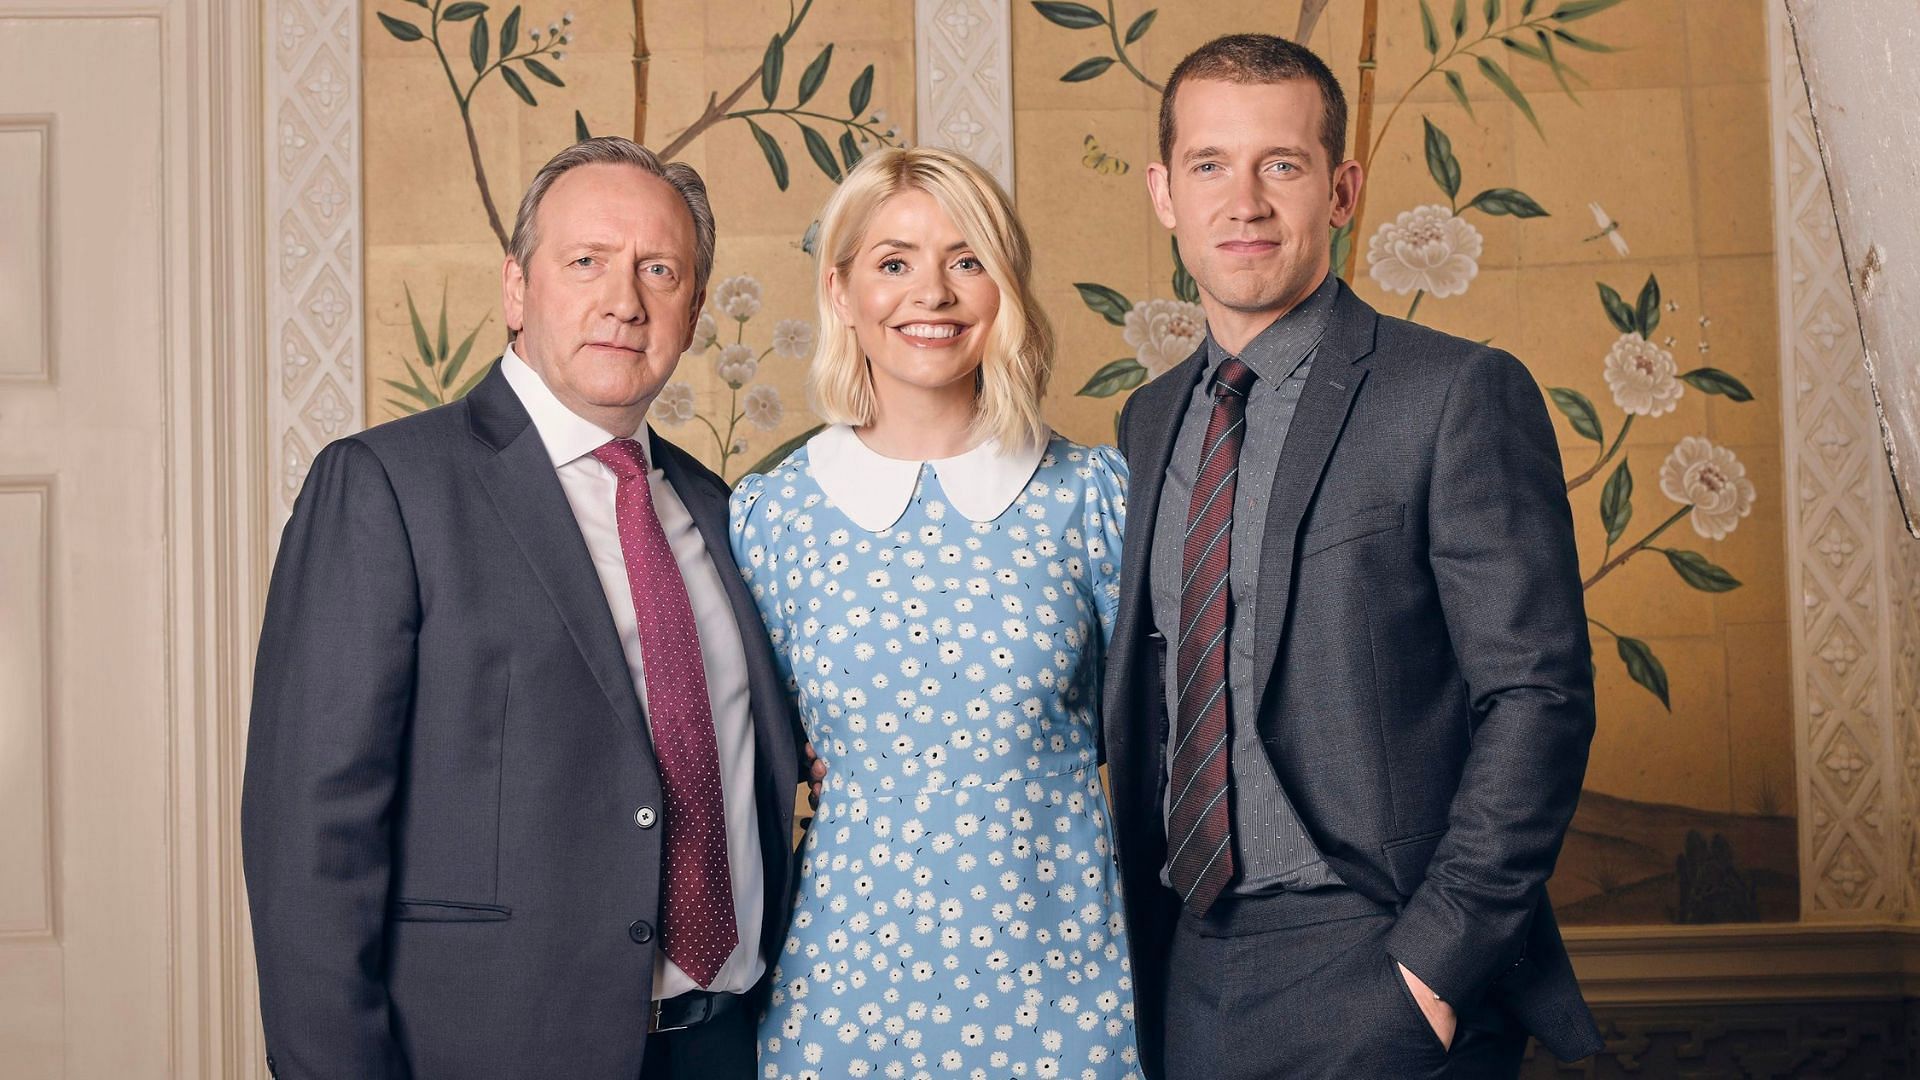 Expect to see a cameo by Holly Willoughby this season (Image via ITV)